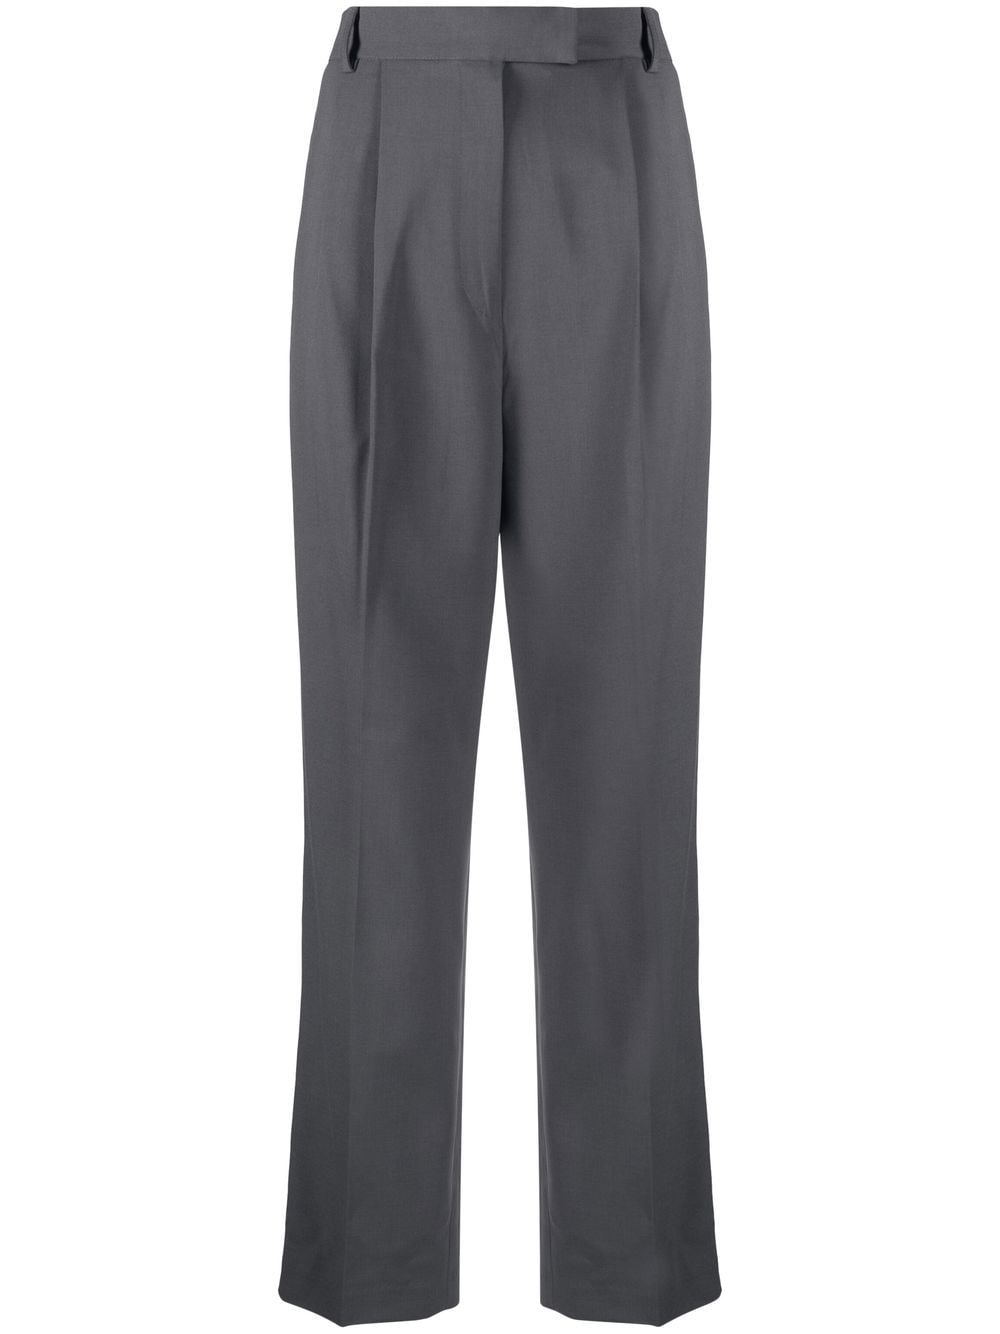 Frankie Shop Bea tailored trousers - Grey